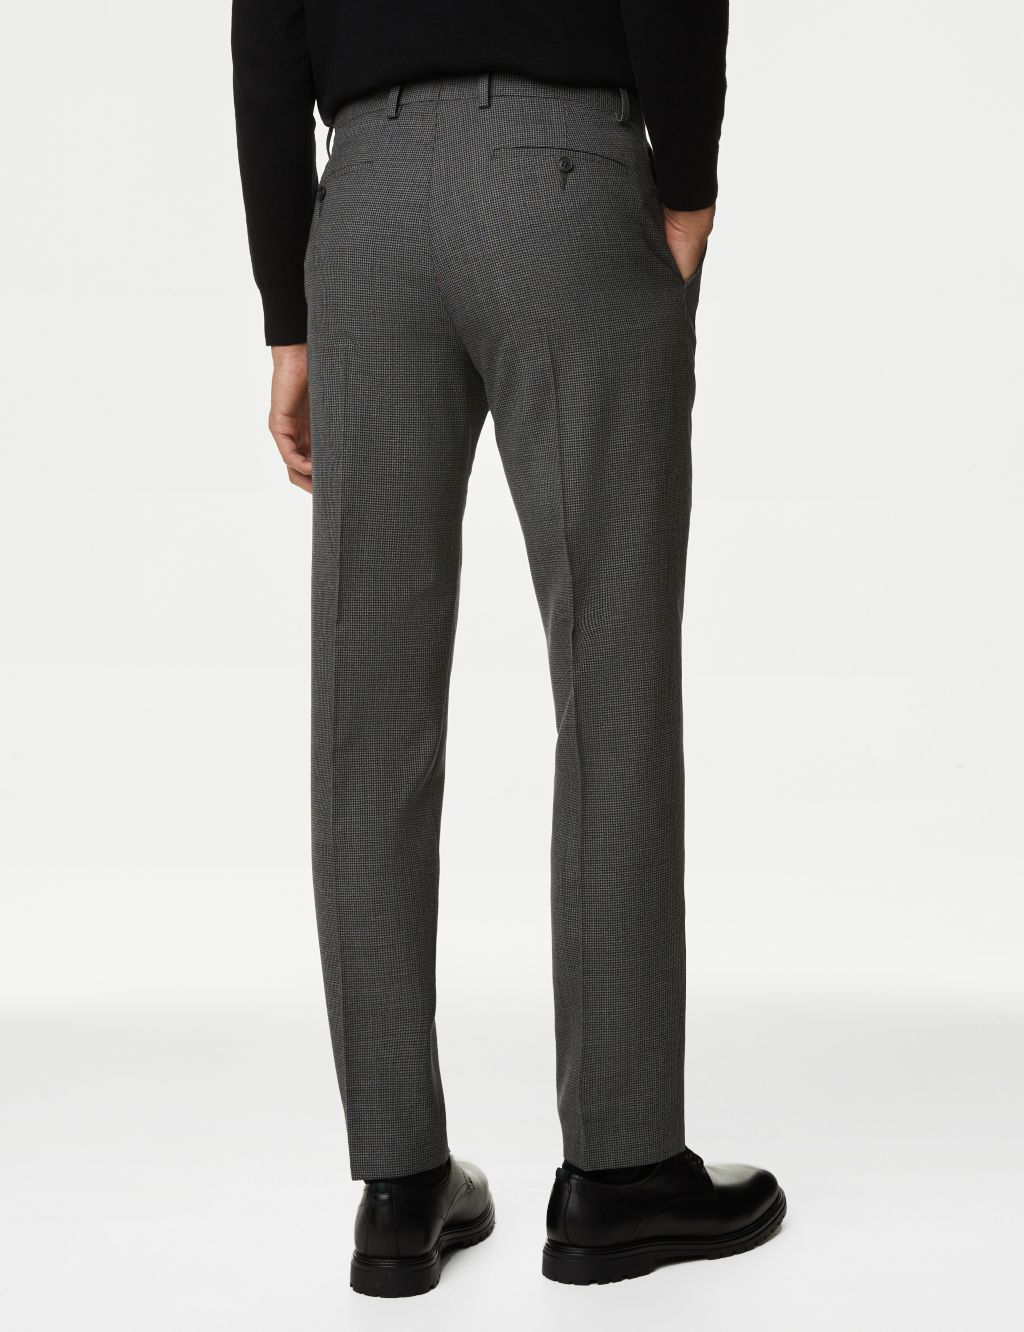 Tailored Fit Pure Wool Puppytooth Trousers image 4